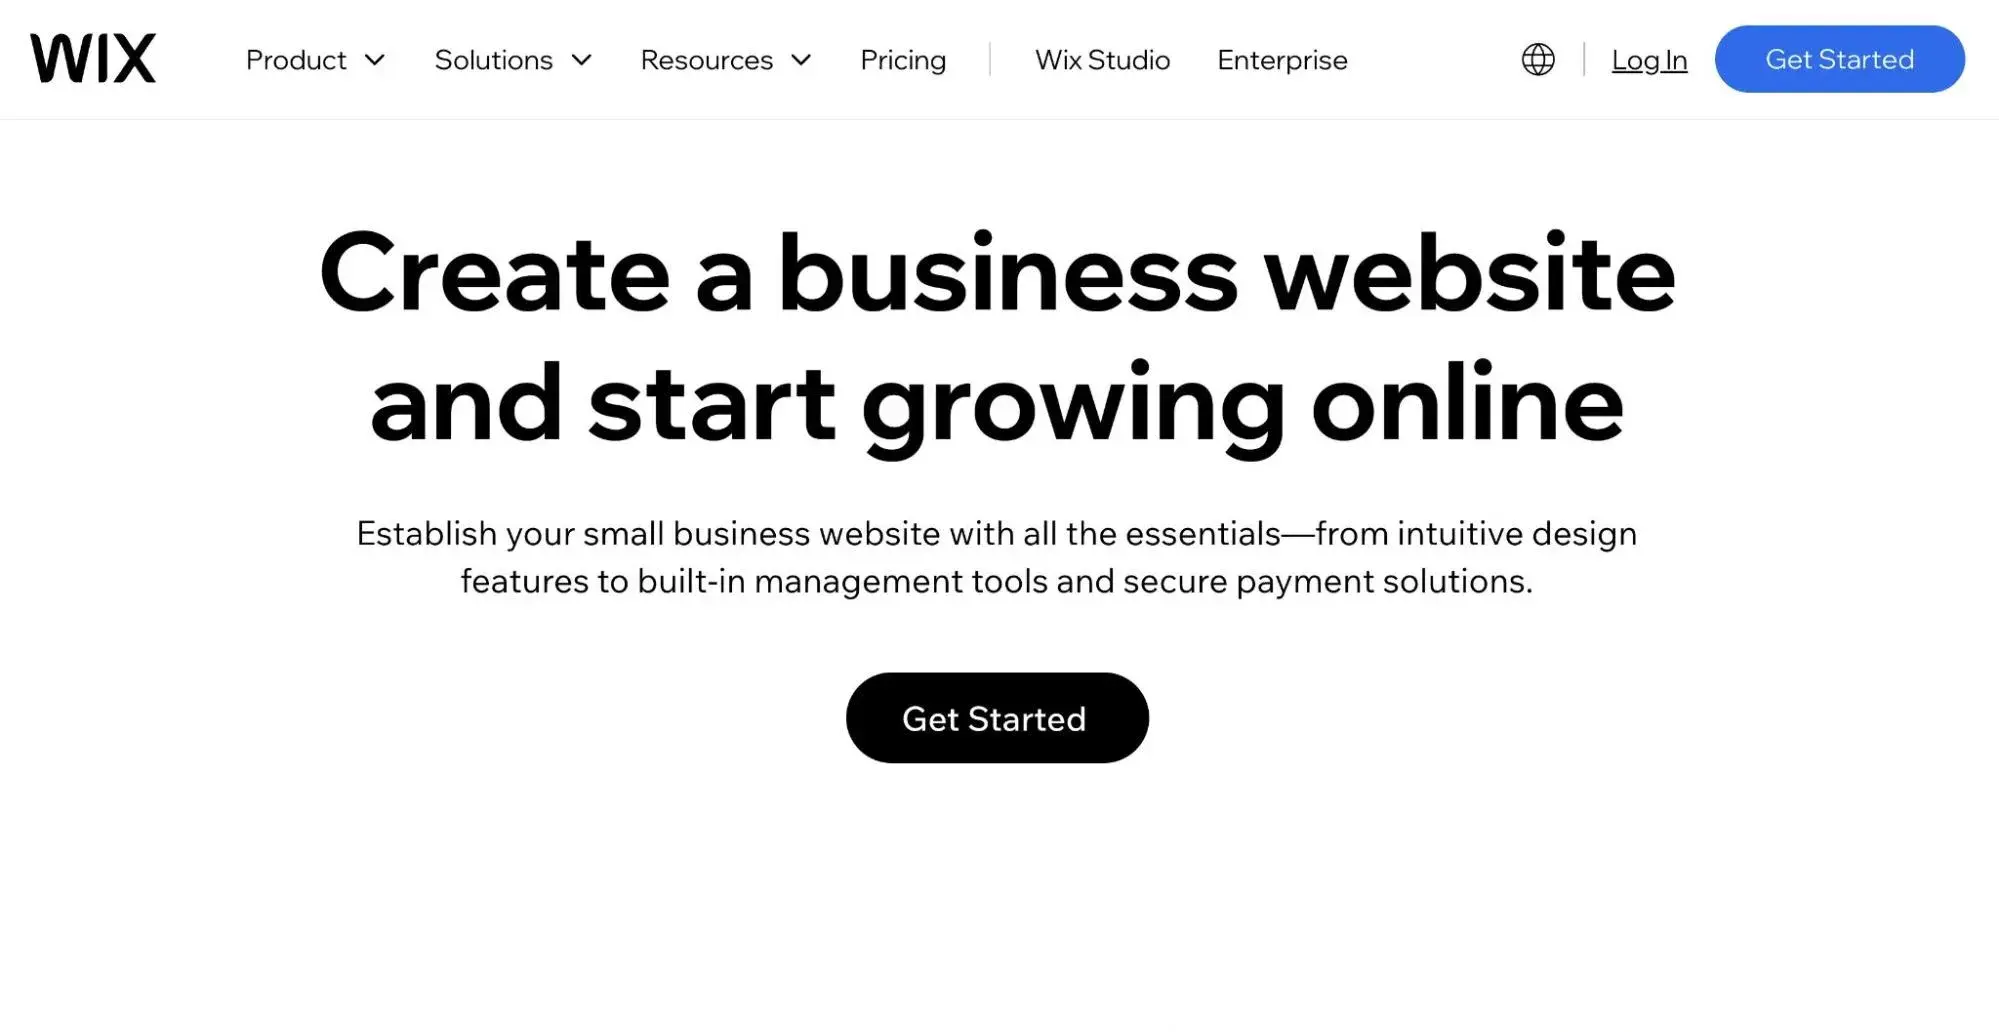 The Wix small business page